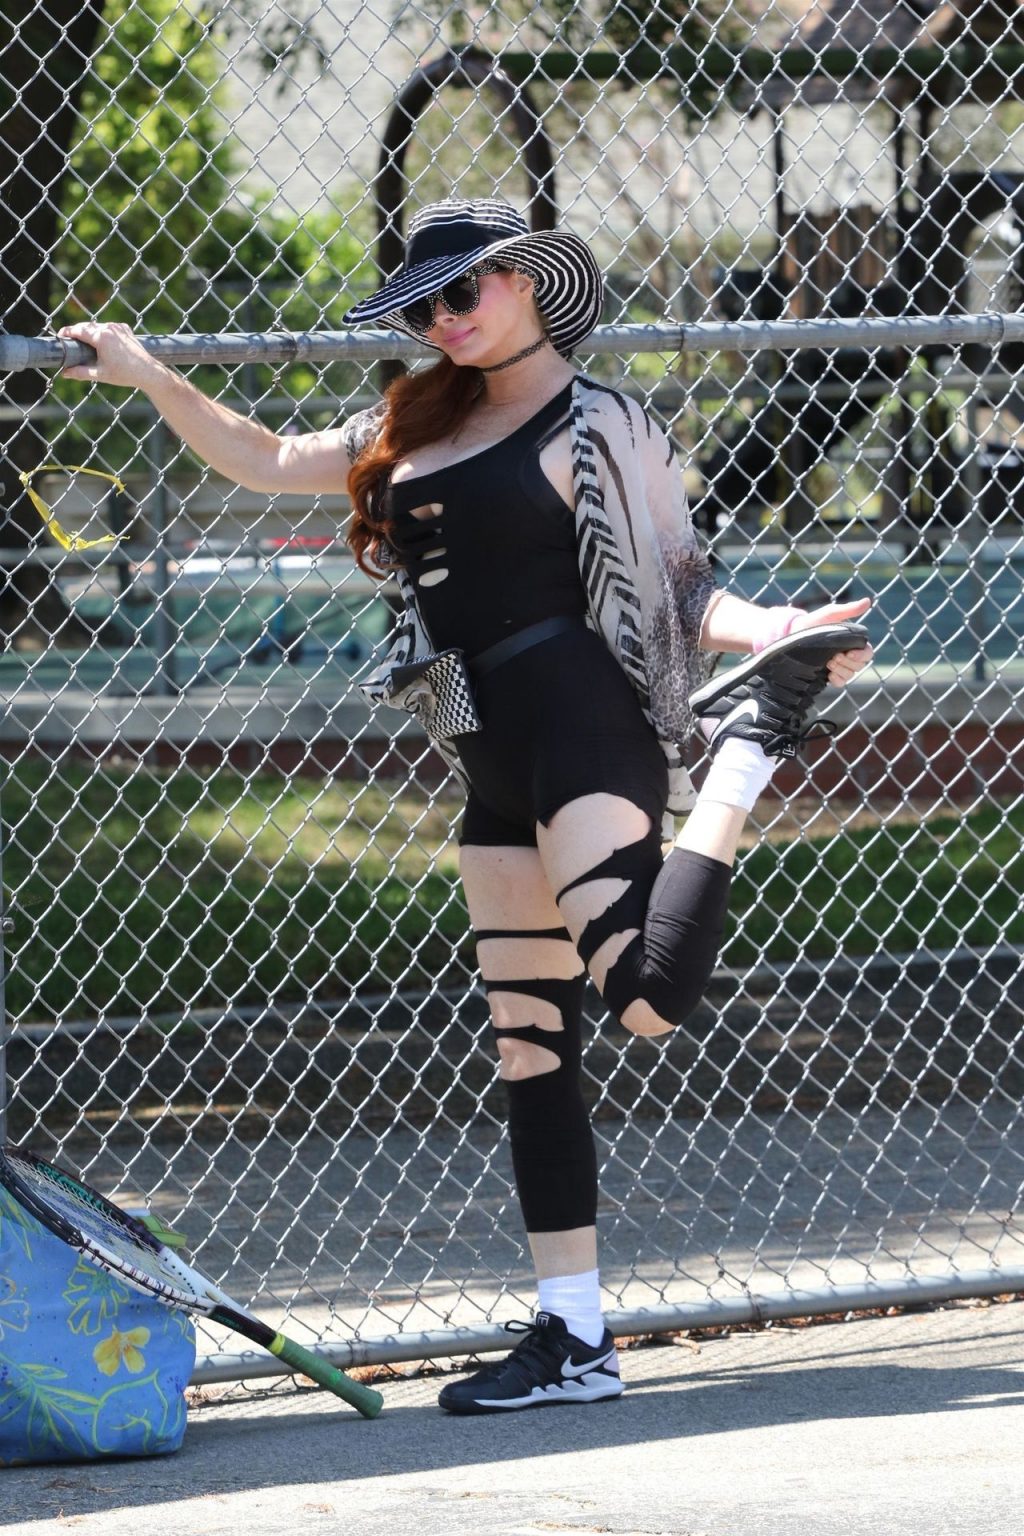 Phoebe Price Attends Tennis Practice in Ripped Up Leggings at the Park (45 Photos)